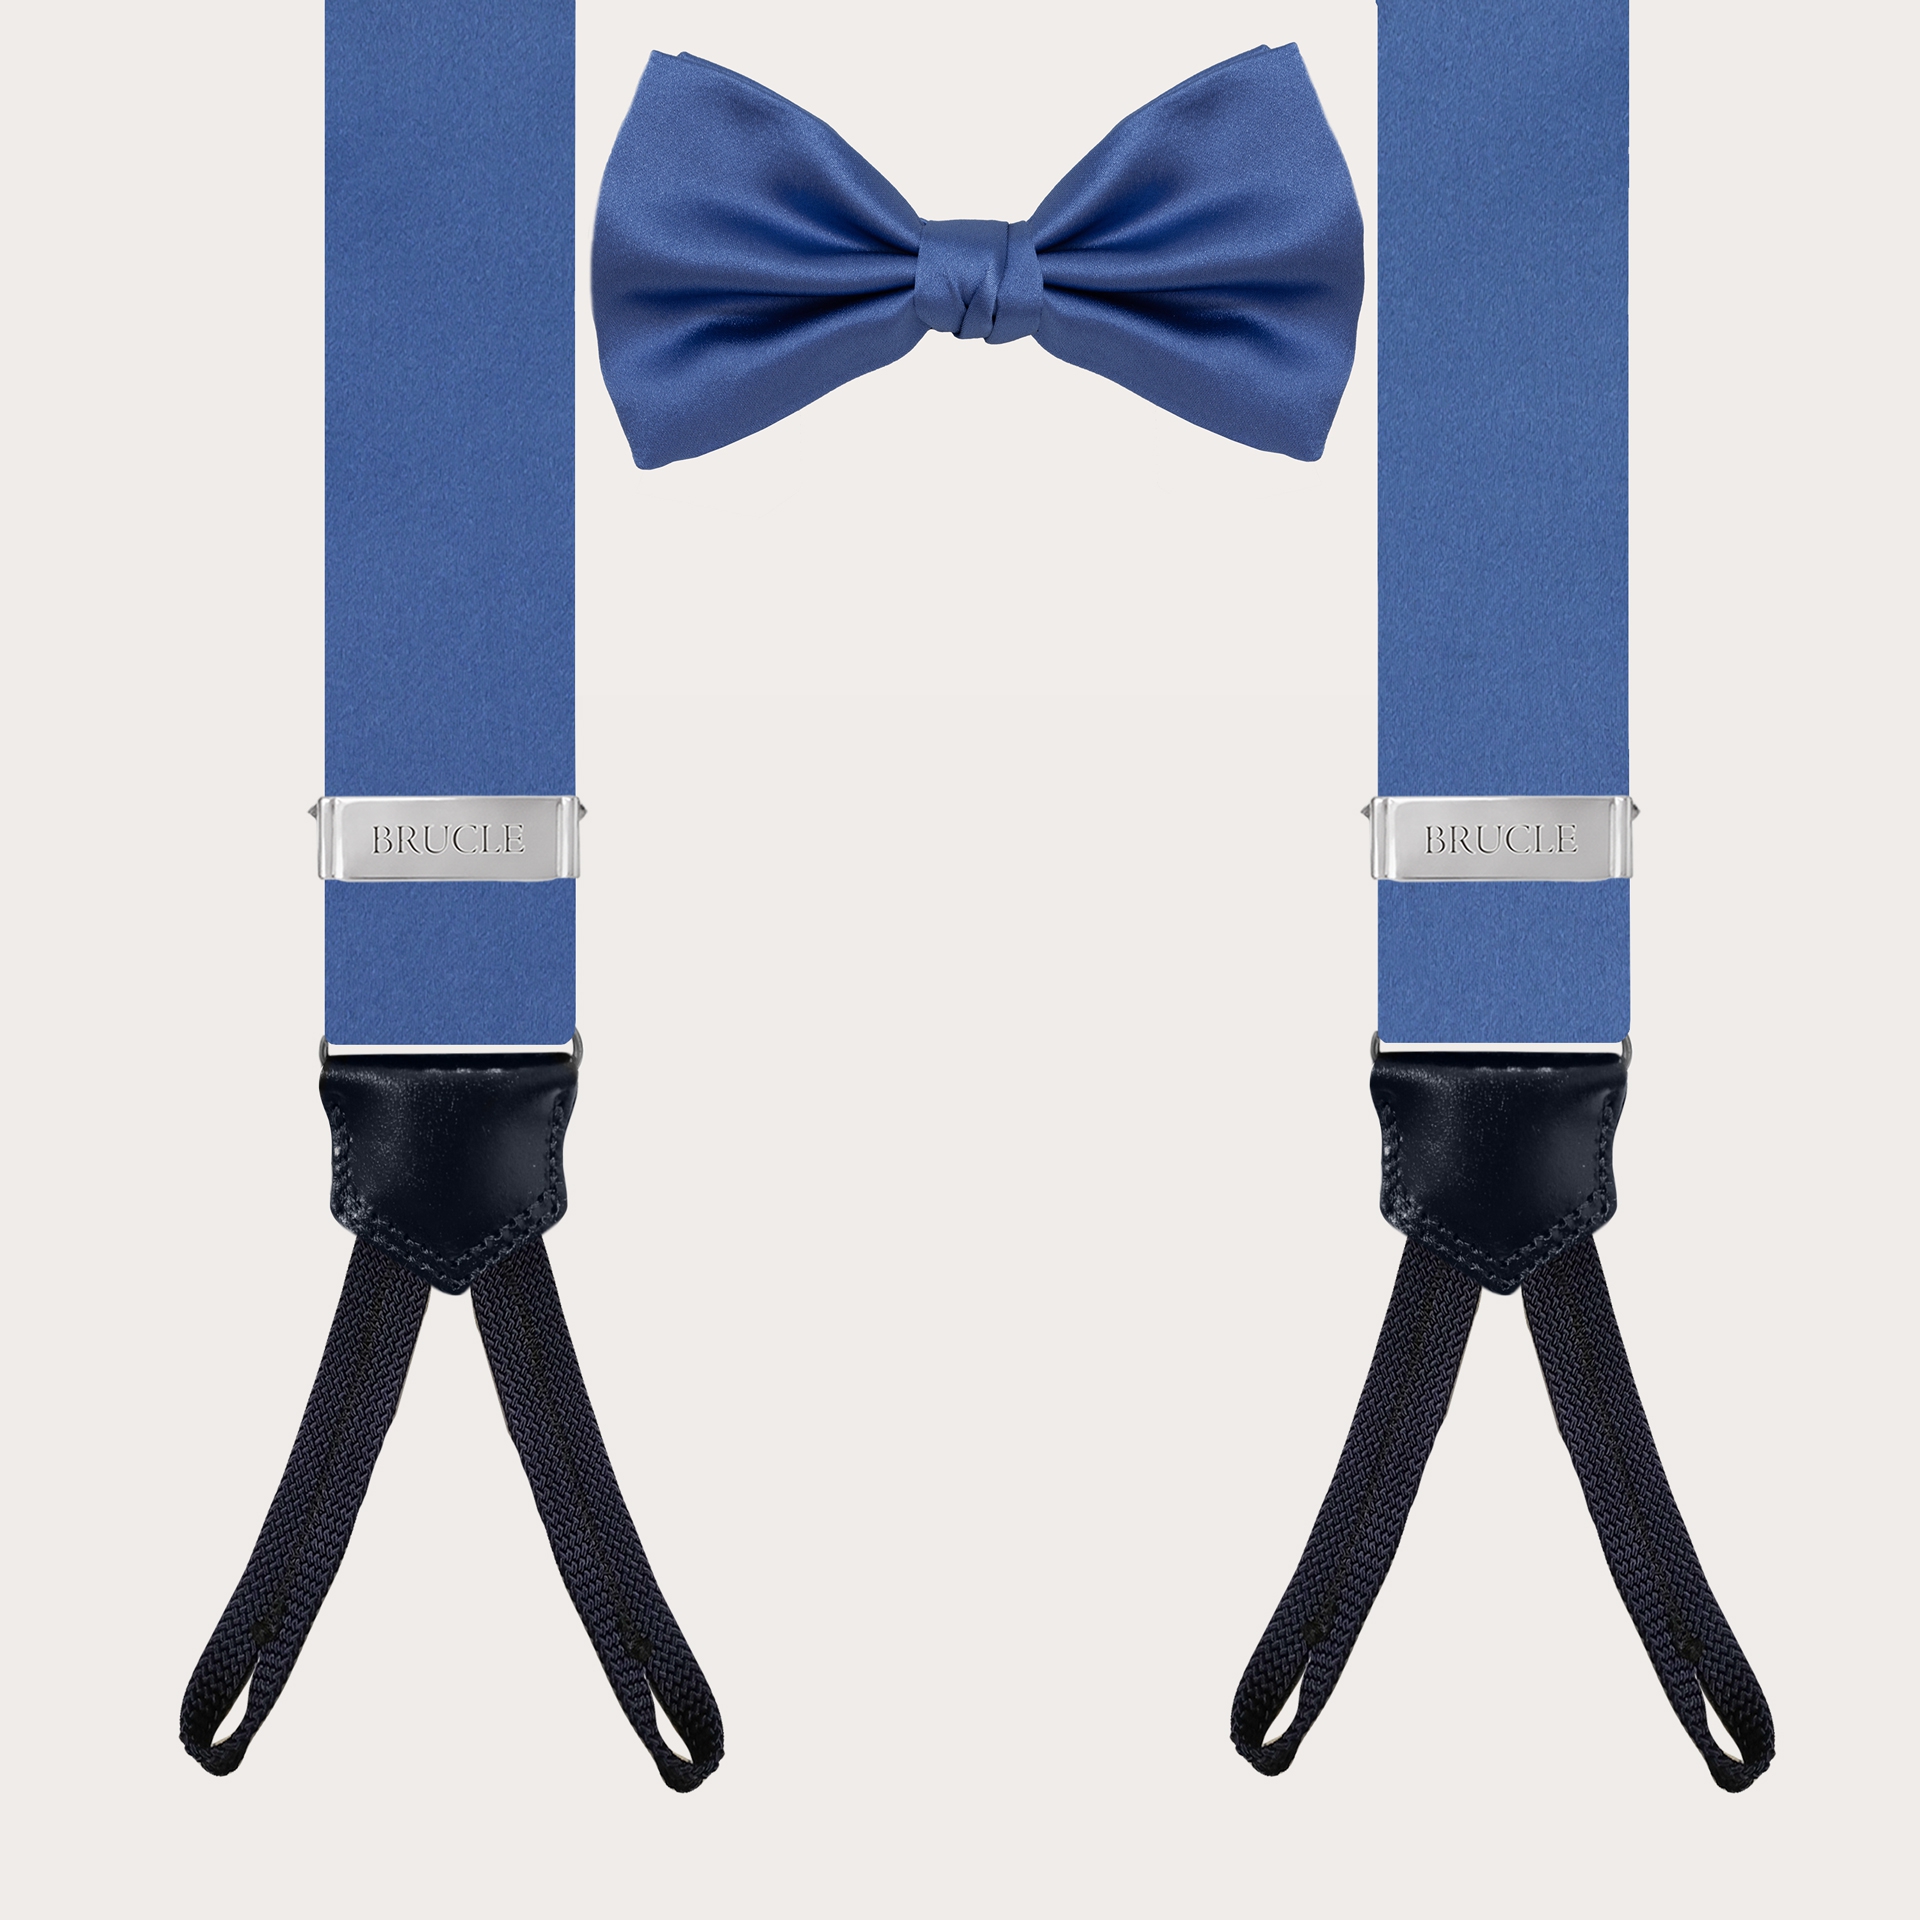 BRUCLE Matching set of suspenders with buttonholes and bow tie, light blue silk satin